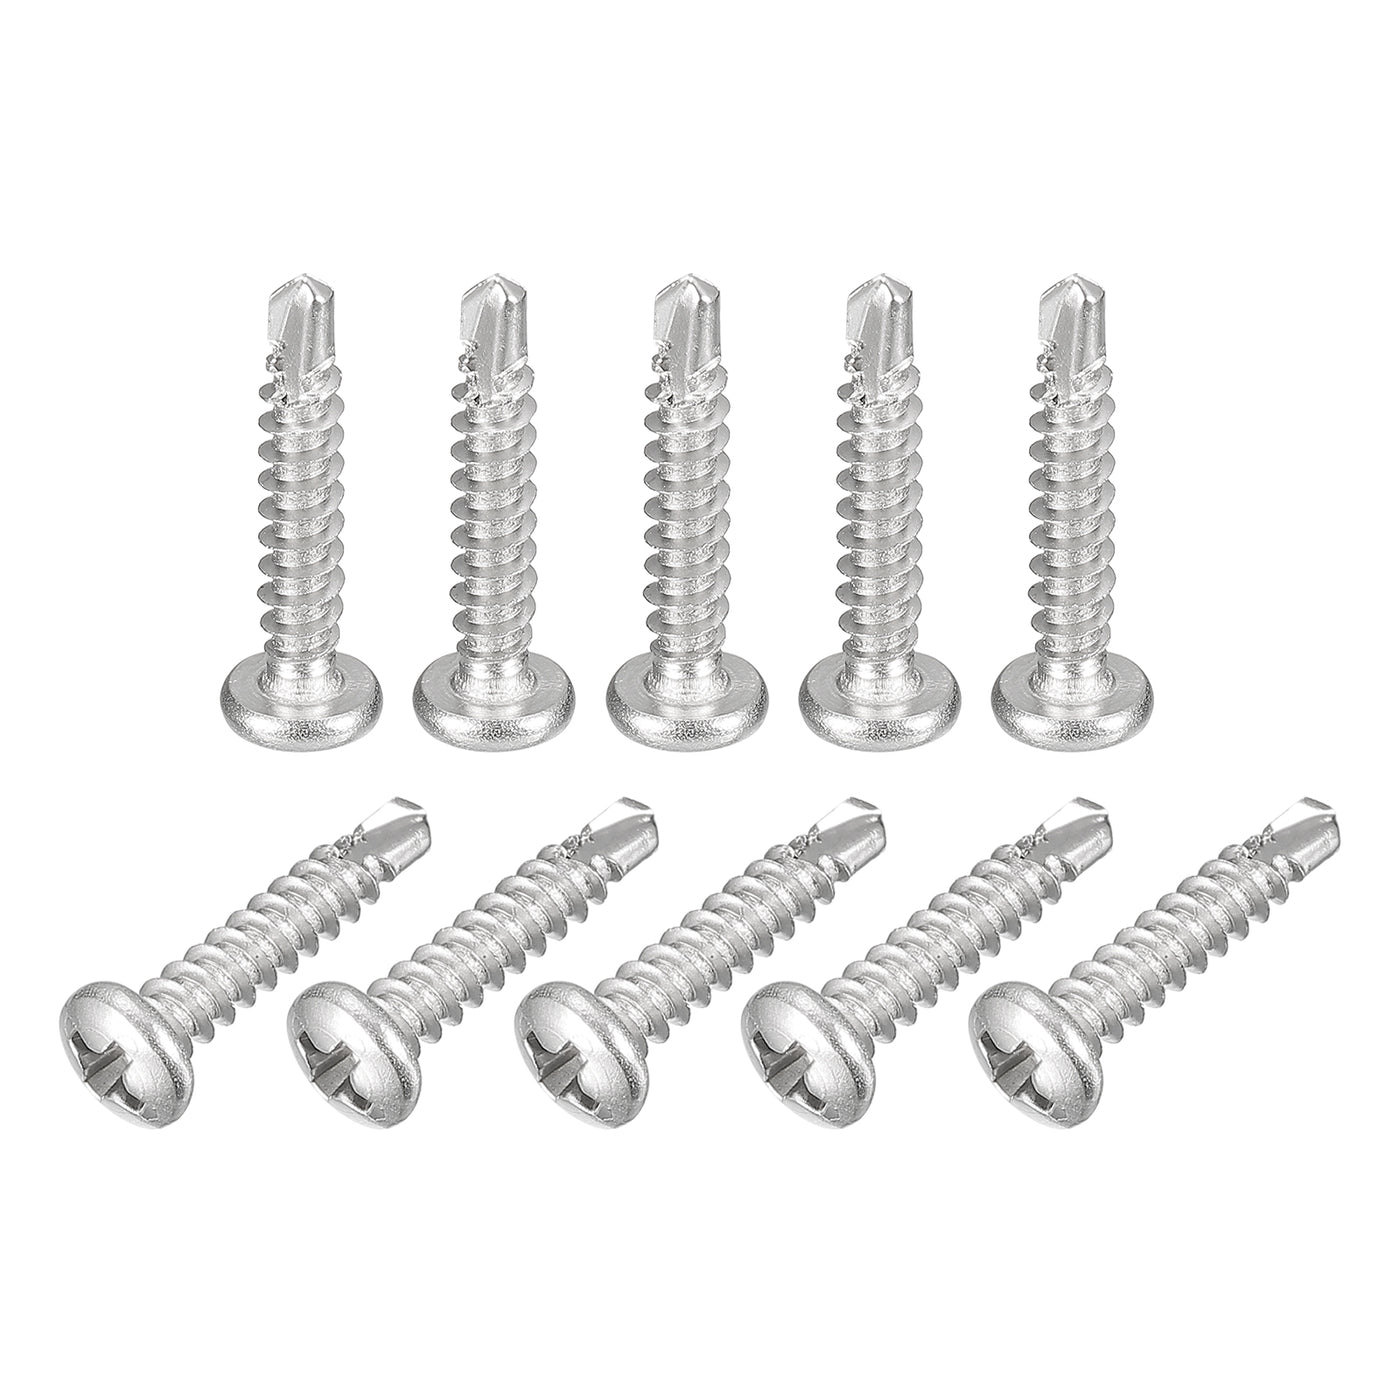 uxcell Uxcell #6 x 3/4" Self Drilling Screws, 100pcs Phillips Pan Head Self Tapping Screws